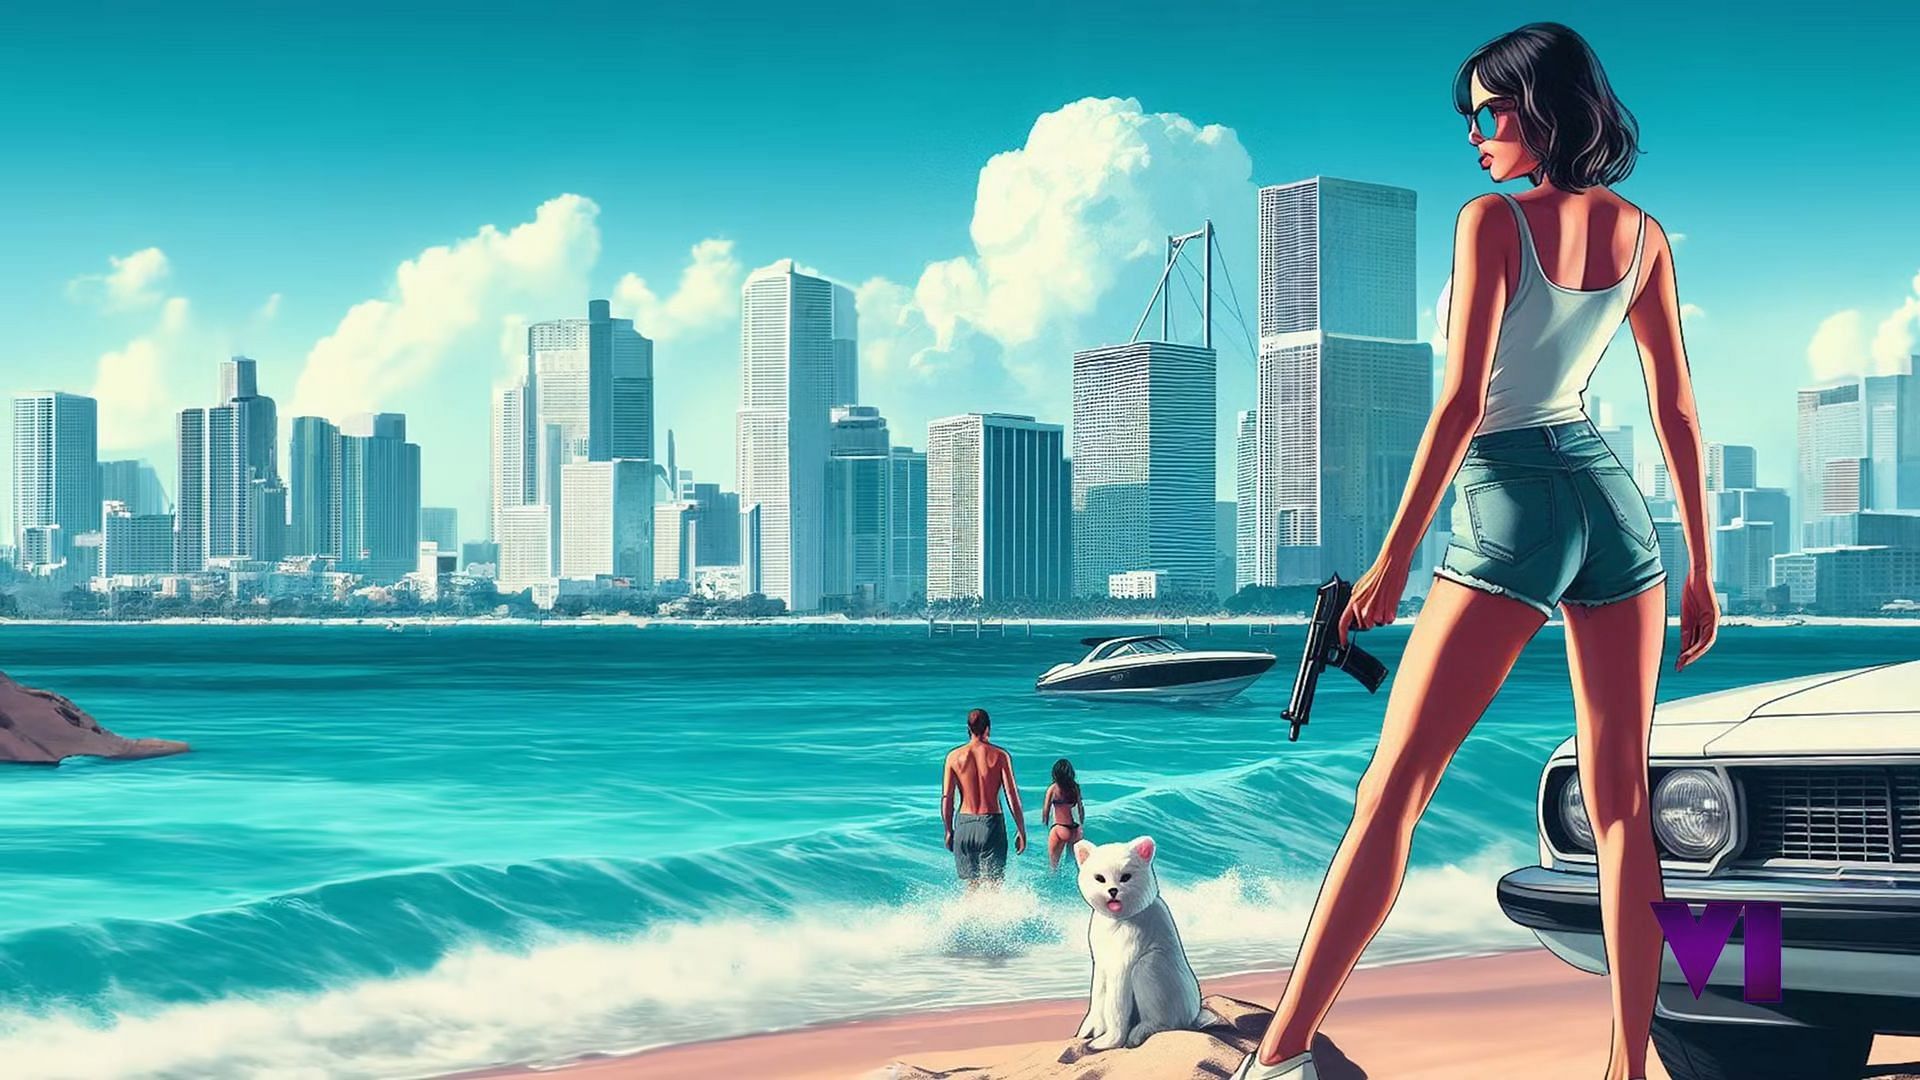 An armed girl on the beach would be quite normal in GTA 6 (Image via YouTube/Rafael Correa Galvis)